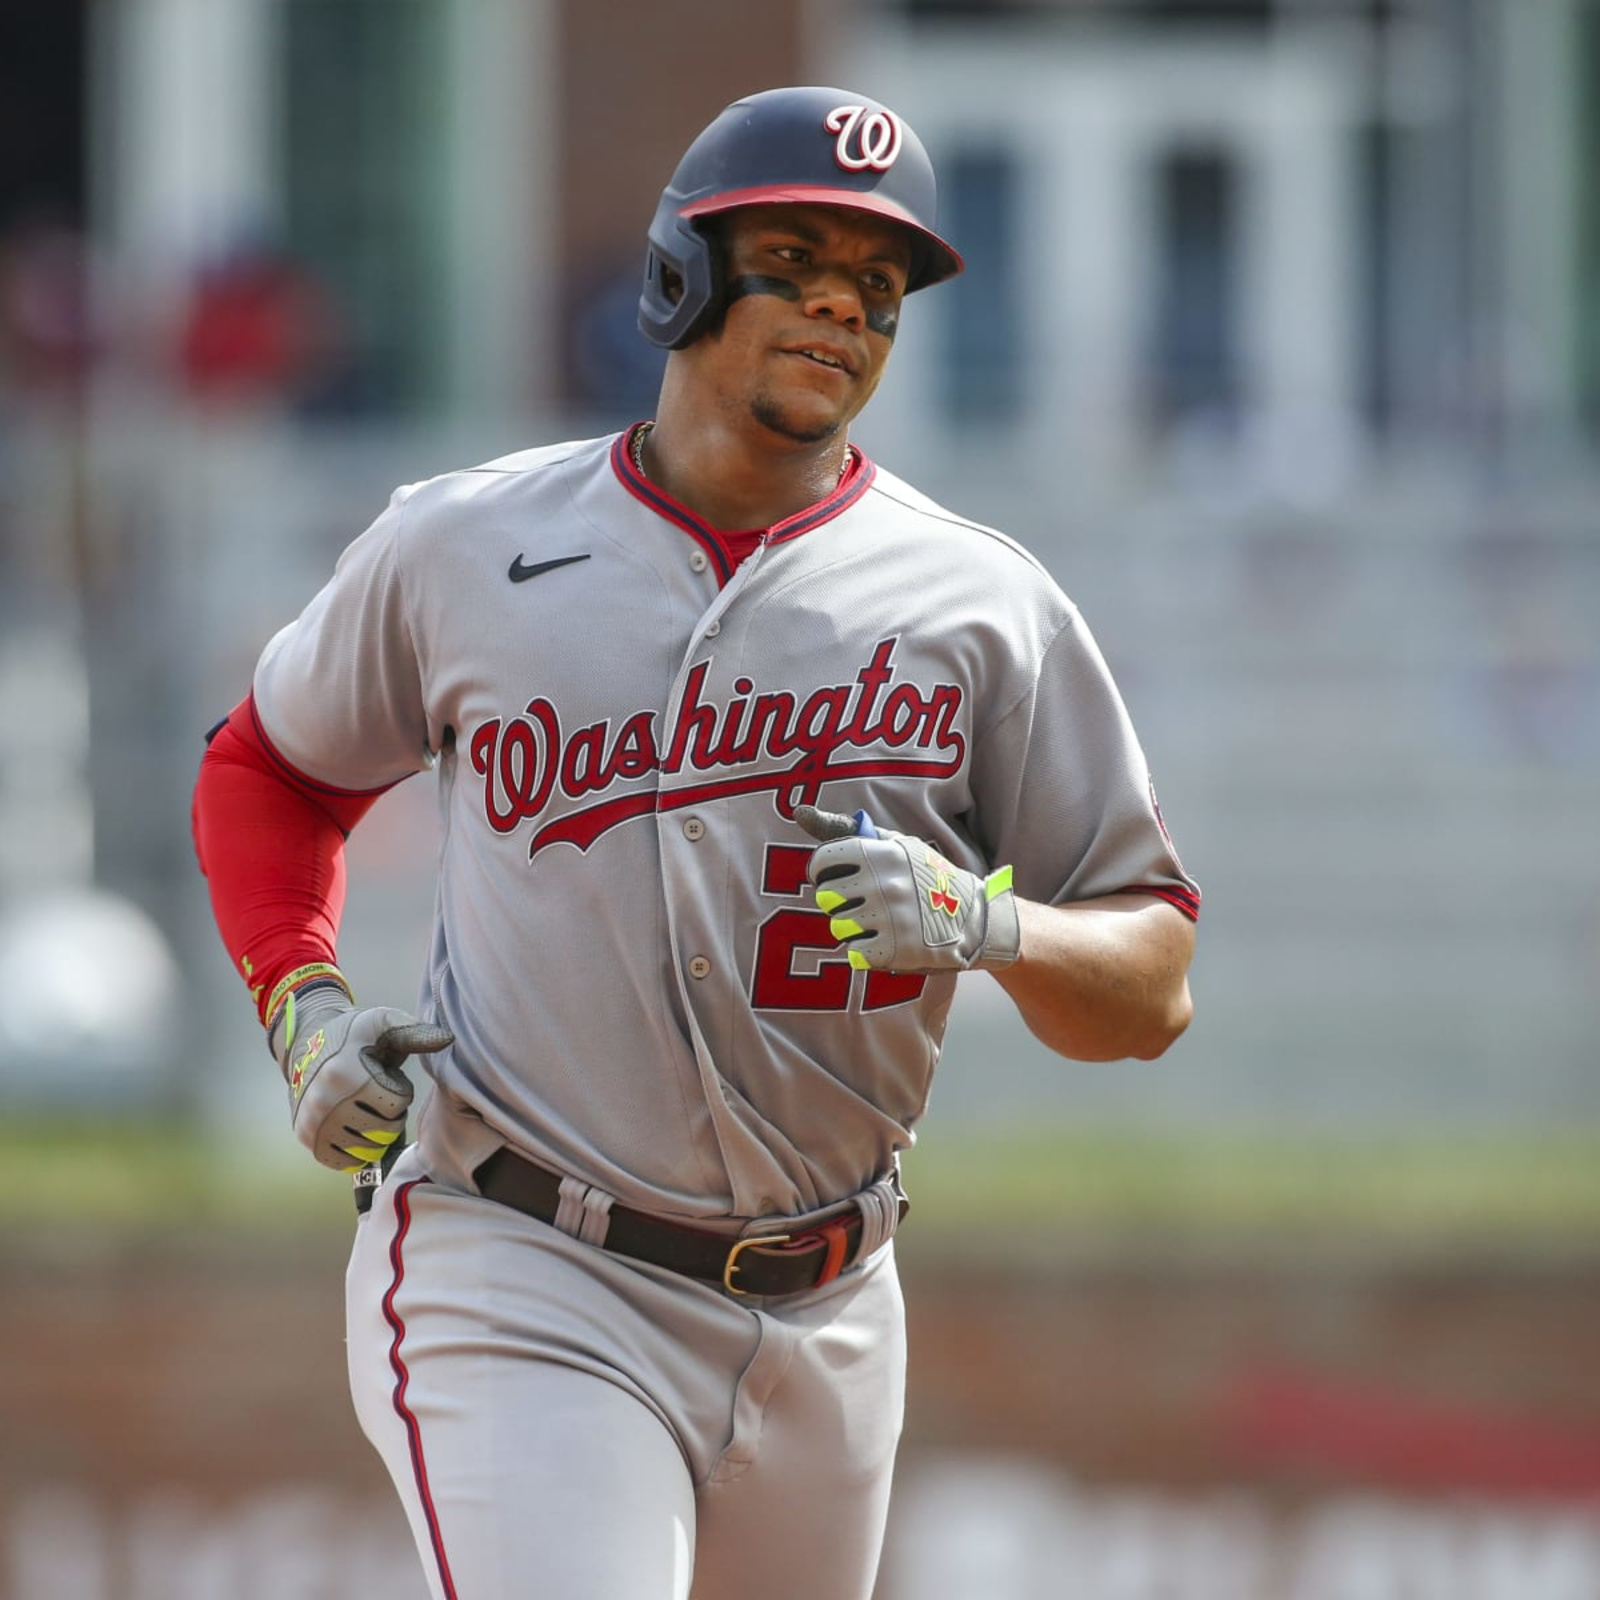 Nationals' asking price for Juan Soto, revealed